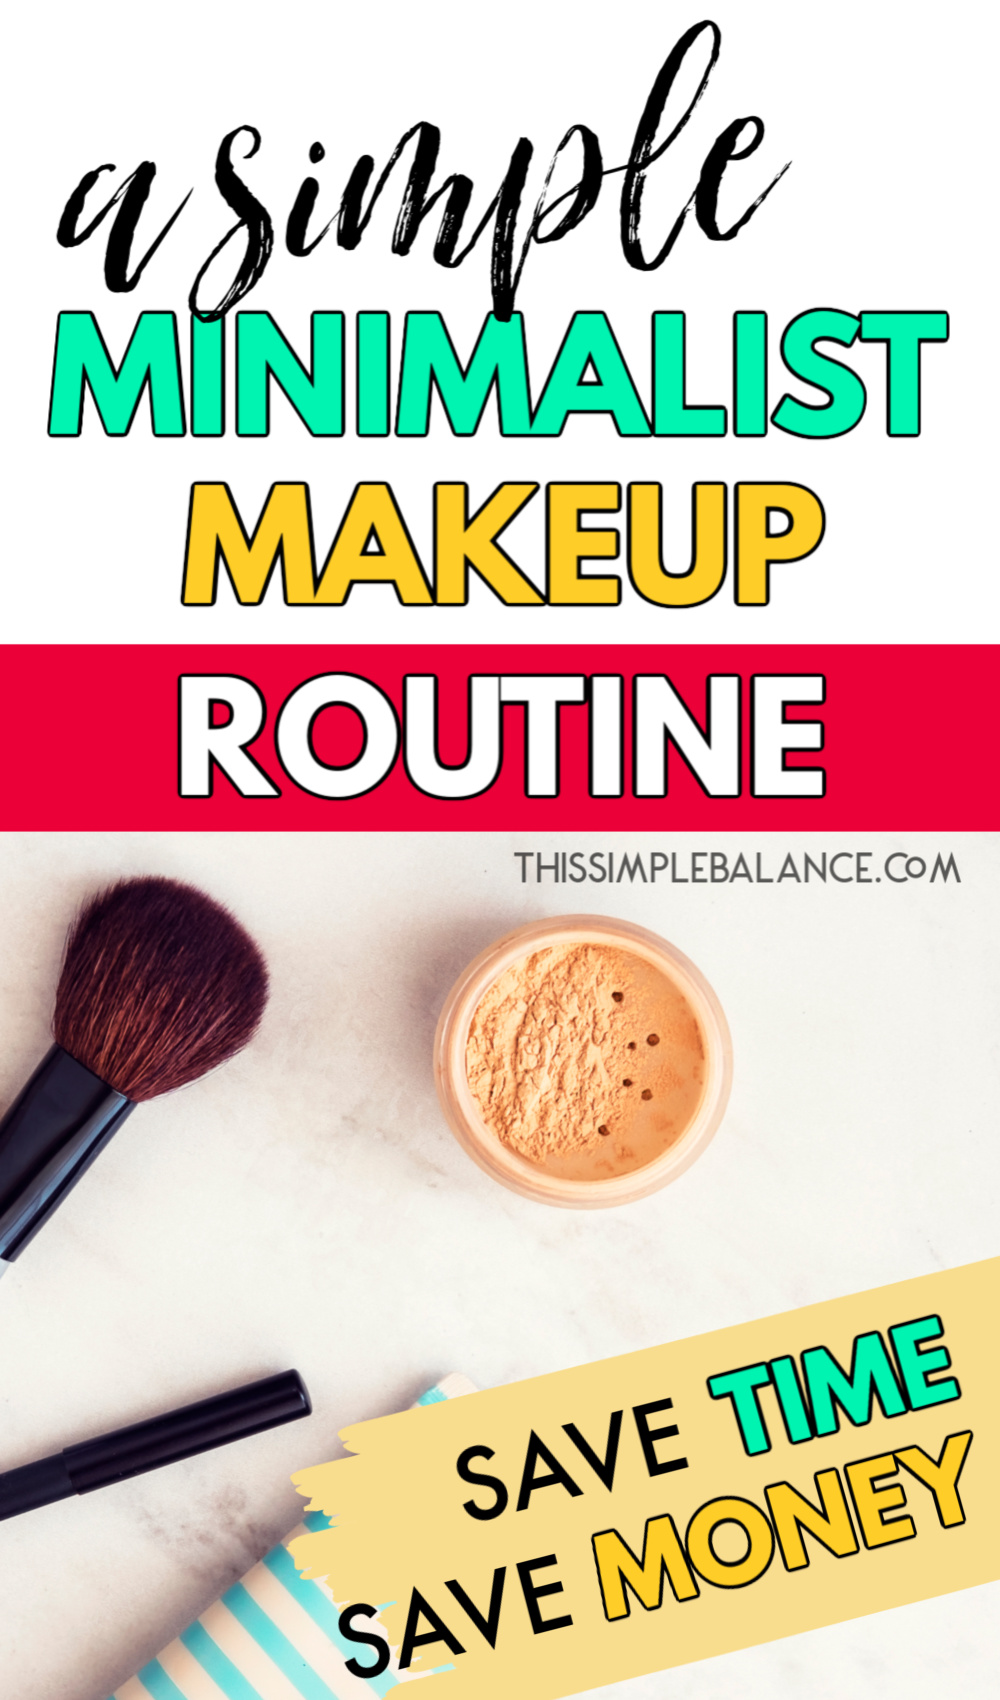 minimalist makeup bag with bronzer, makeup brush and eye liner, with text overlay, "a simple minimalist makeup routine - save time, save money"